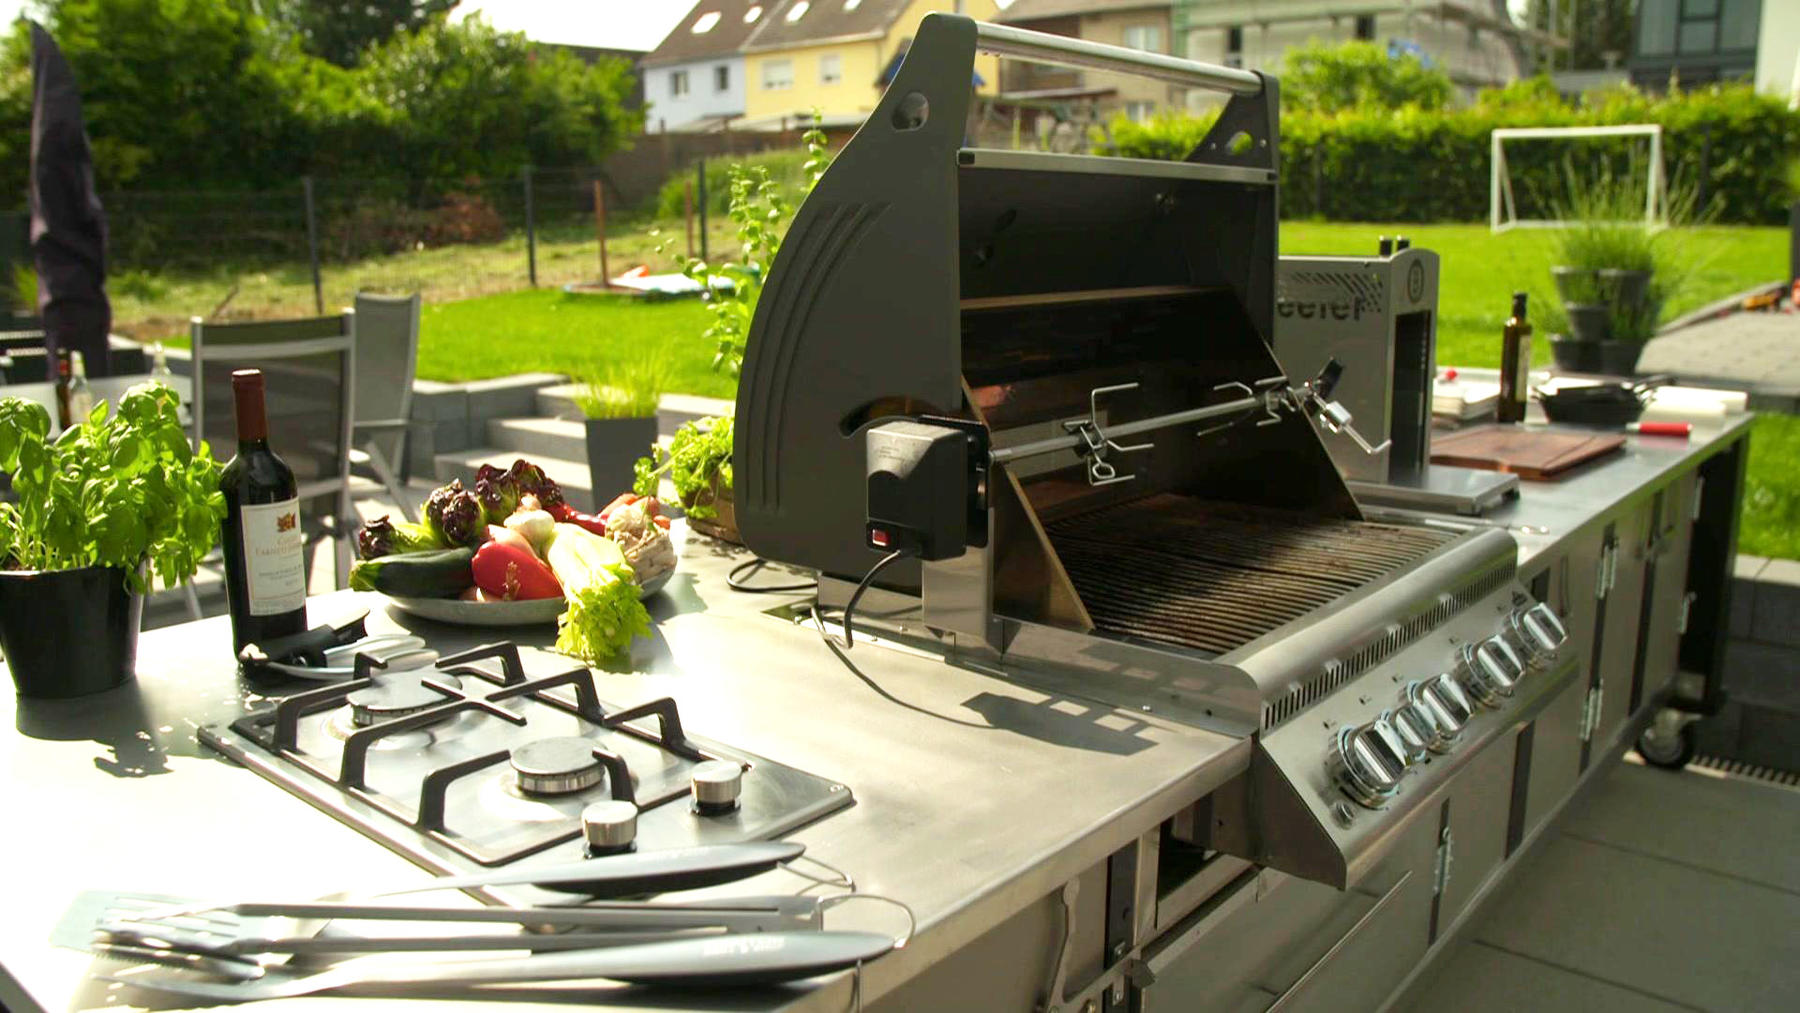 Trends am Grill - So macht man Barbecue